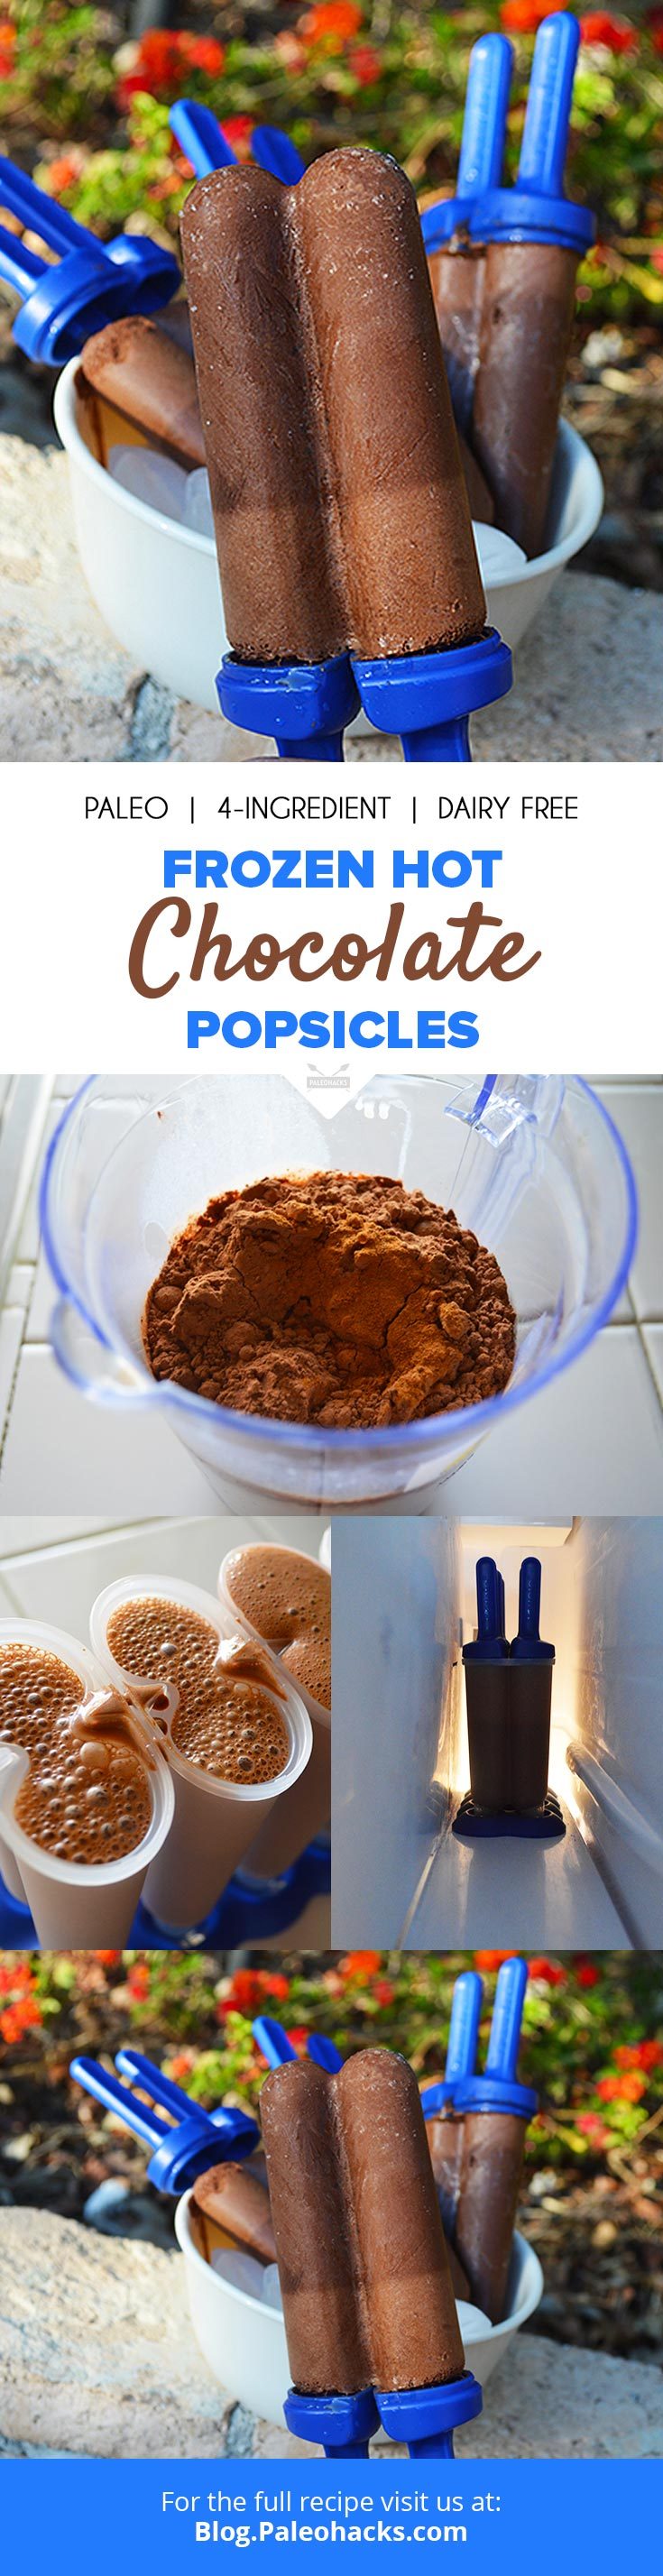 Have you ever had a frozen hot chocolate? Want to give it a try? These silky smooth cinnamon infused Frozen Hot Chocolate Popsicles will melt in your mouth.